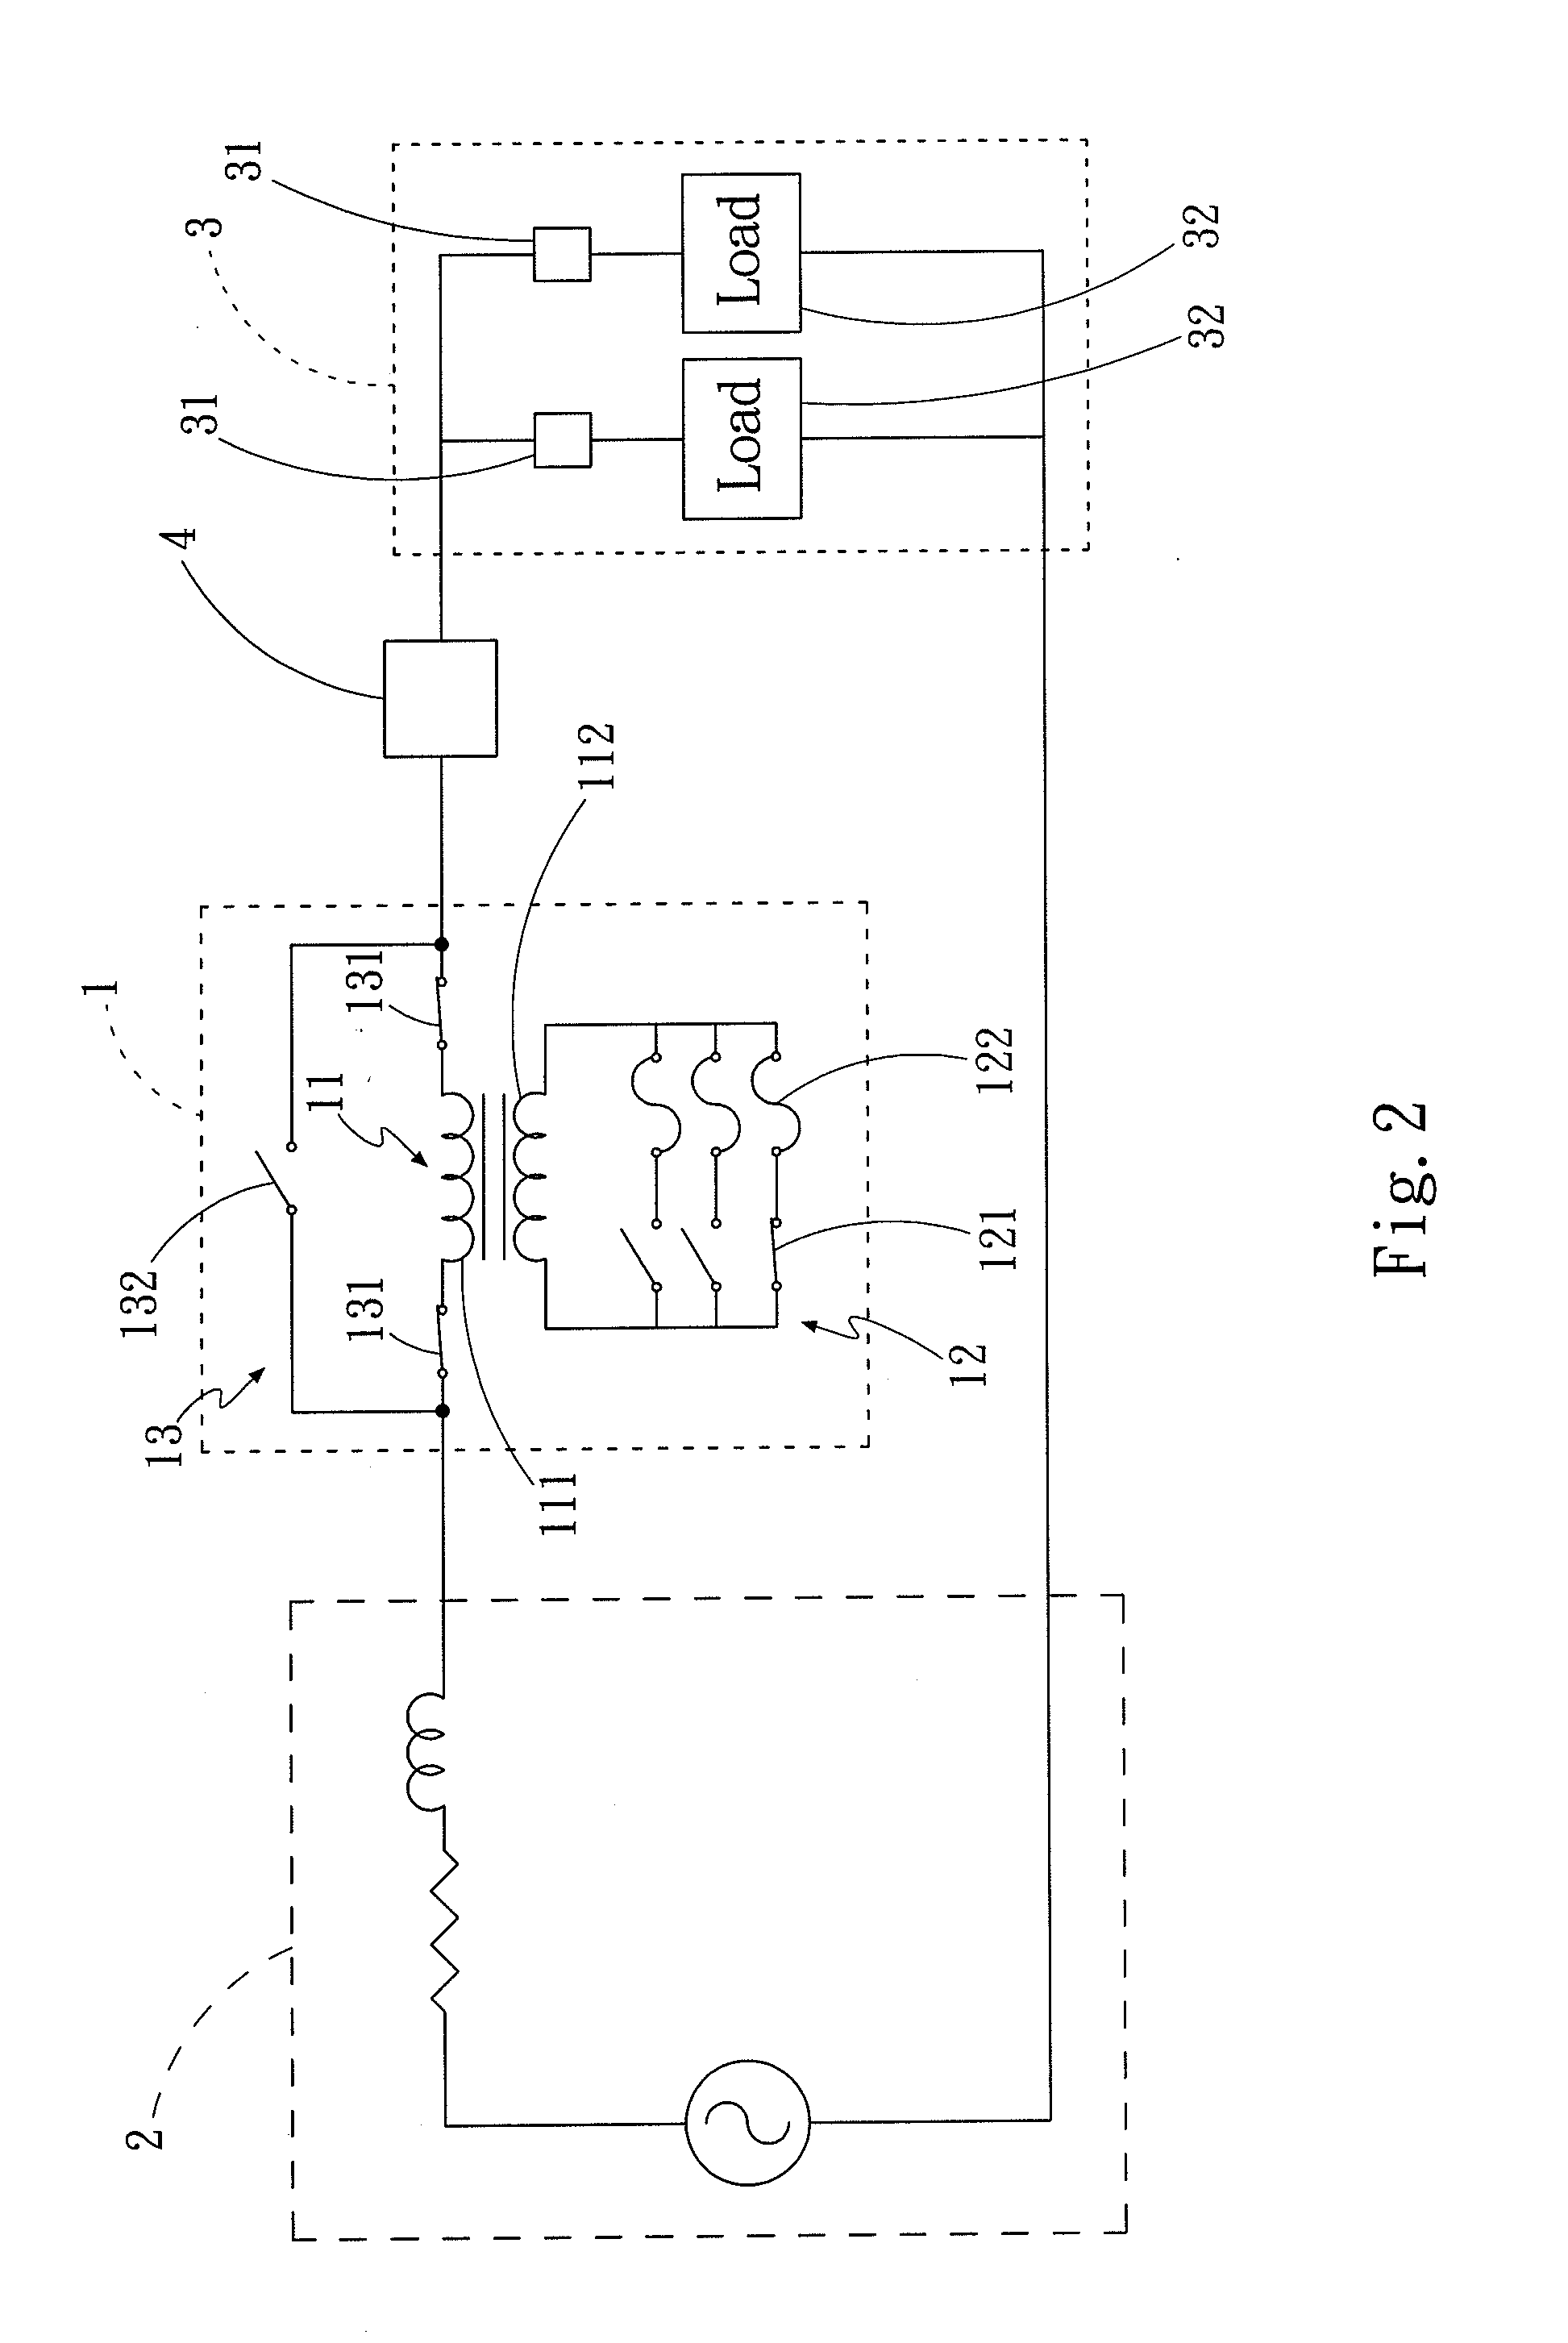 Isolation-type ac fault current limited circuit